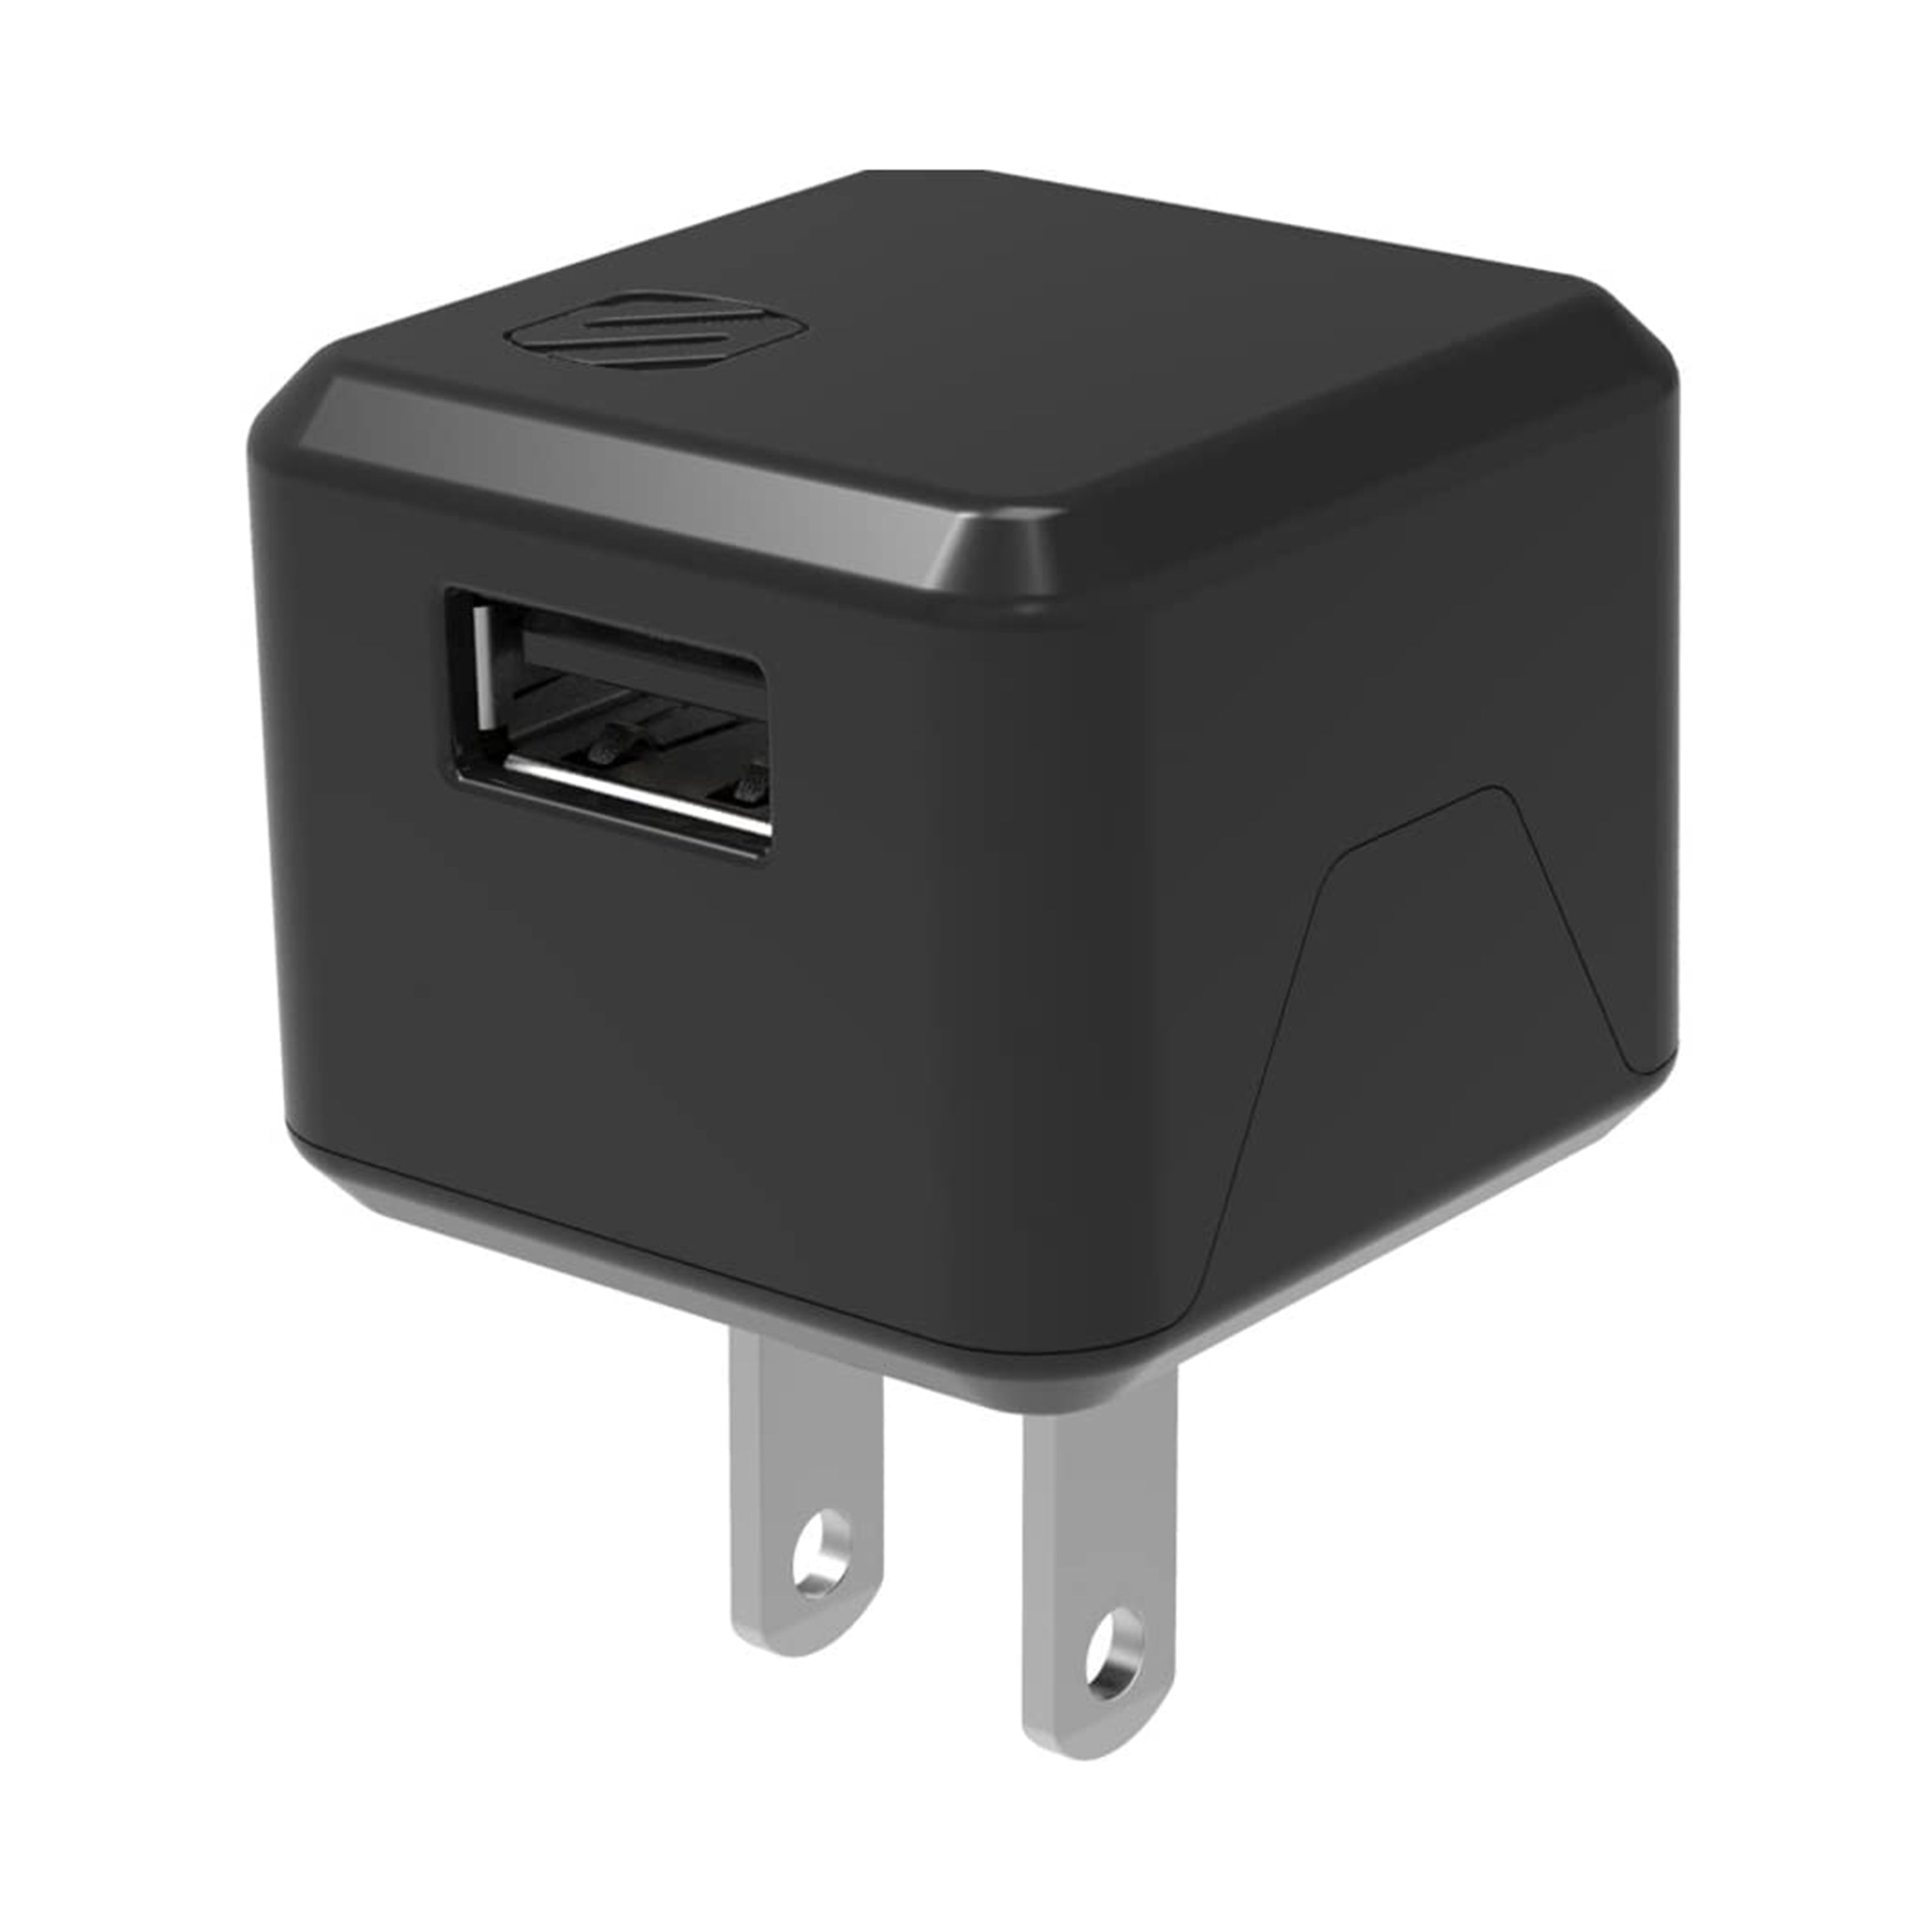 Scosche USBH121, Single USB Wall Charger For Lightning Devices (Black)